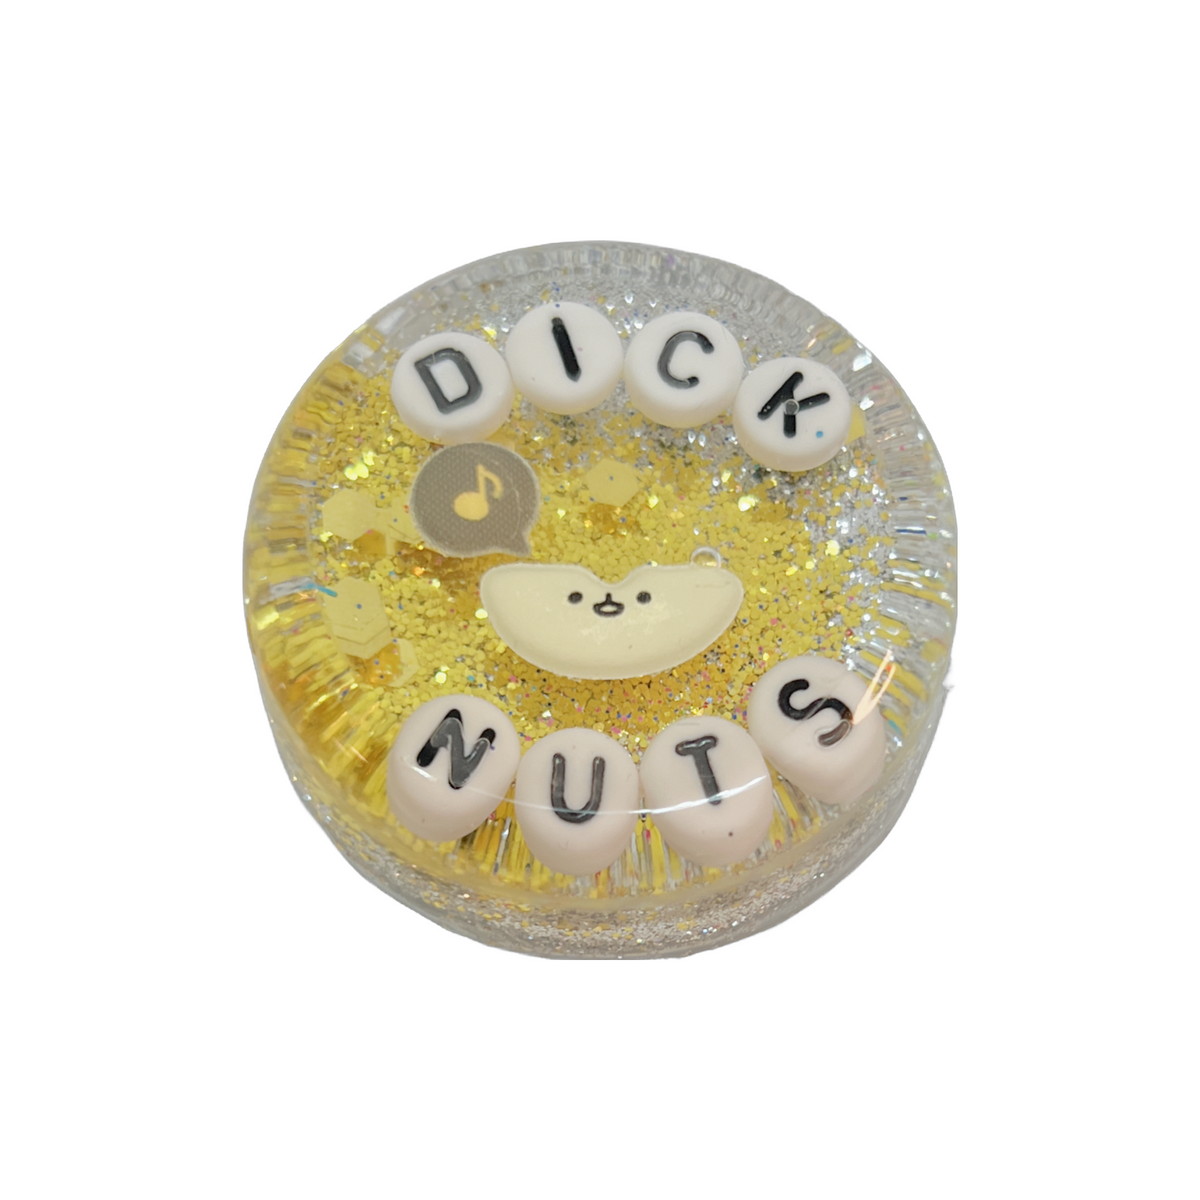 Dick Nuts - Shower Art - READY TO SHIP